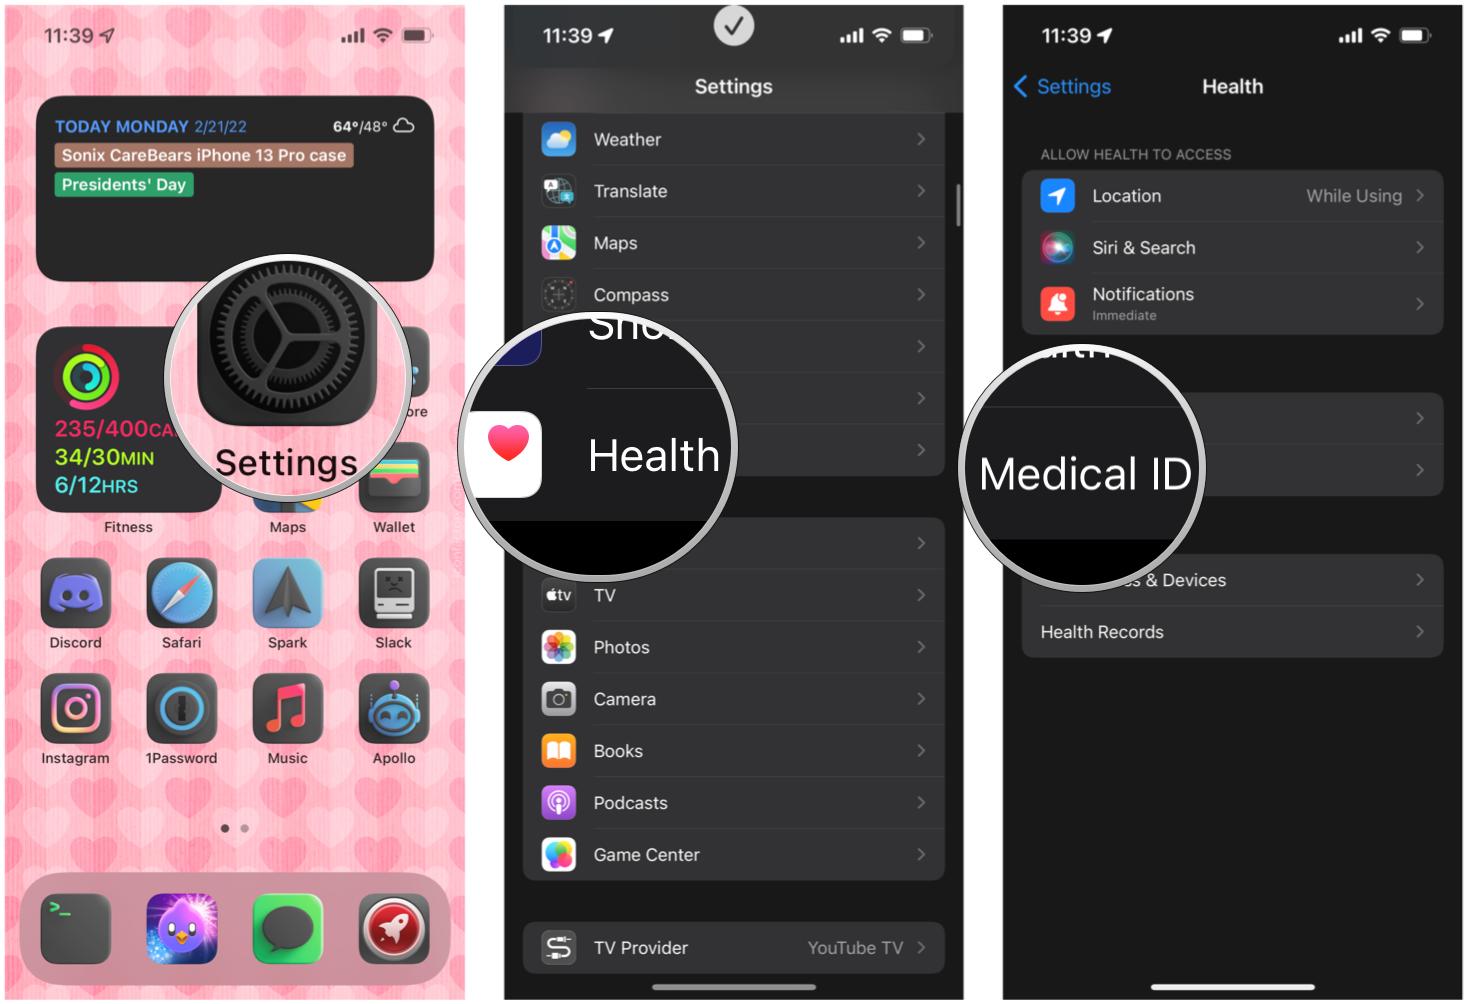 Set up Medical ID on iPhone in Settings: Launch Settinsg, tap Health, tap Medical ID